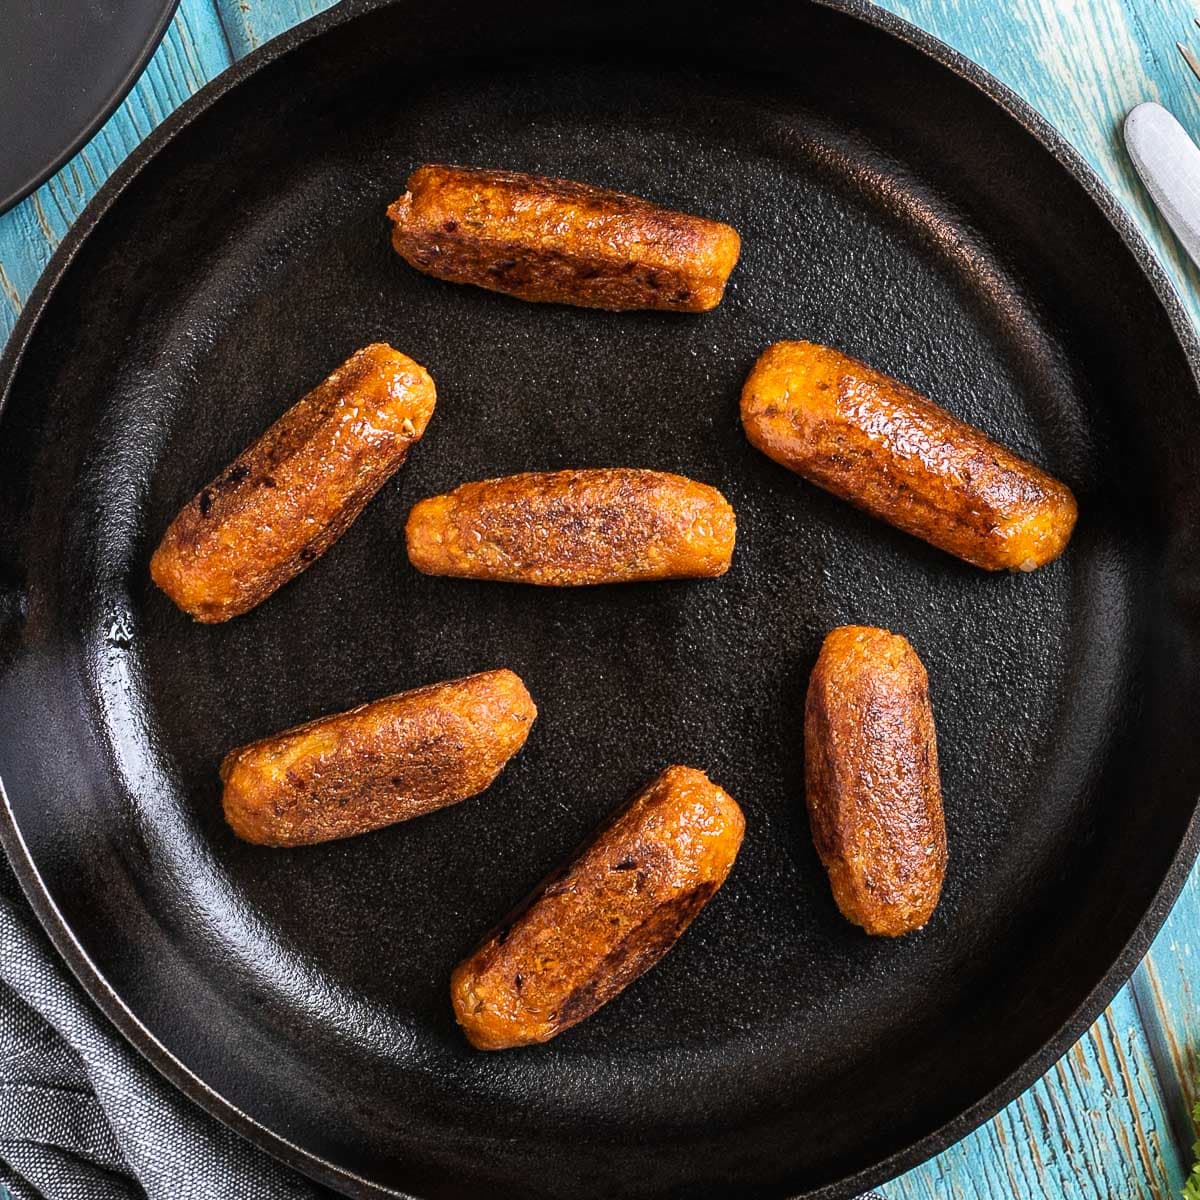 7 small sausages in a black cast-iron skillet.